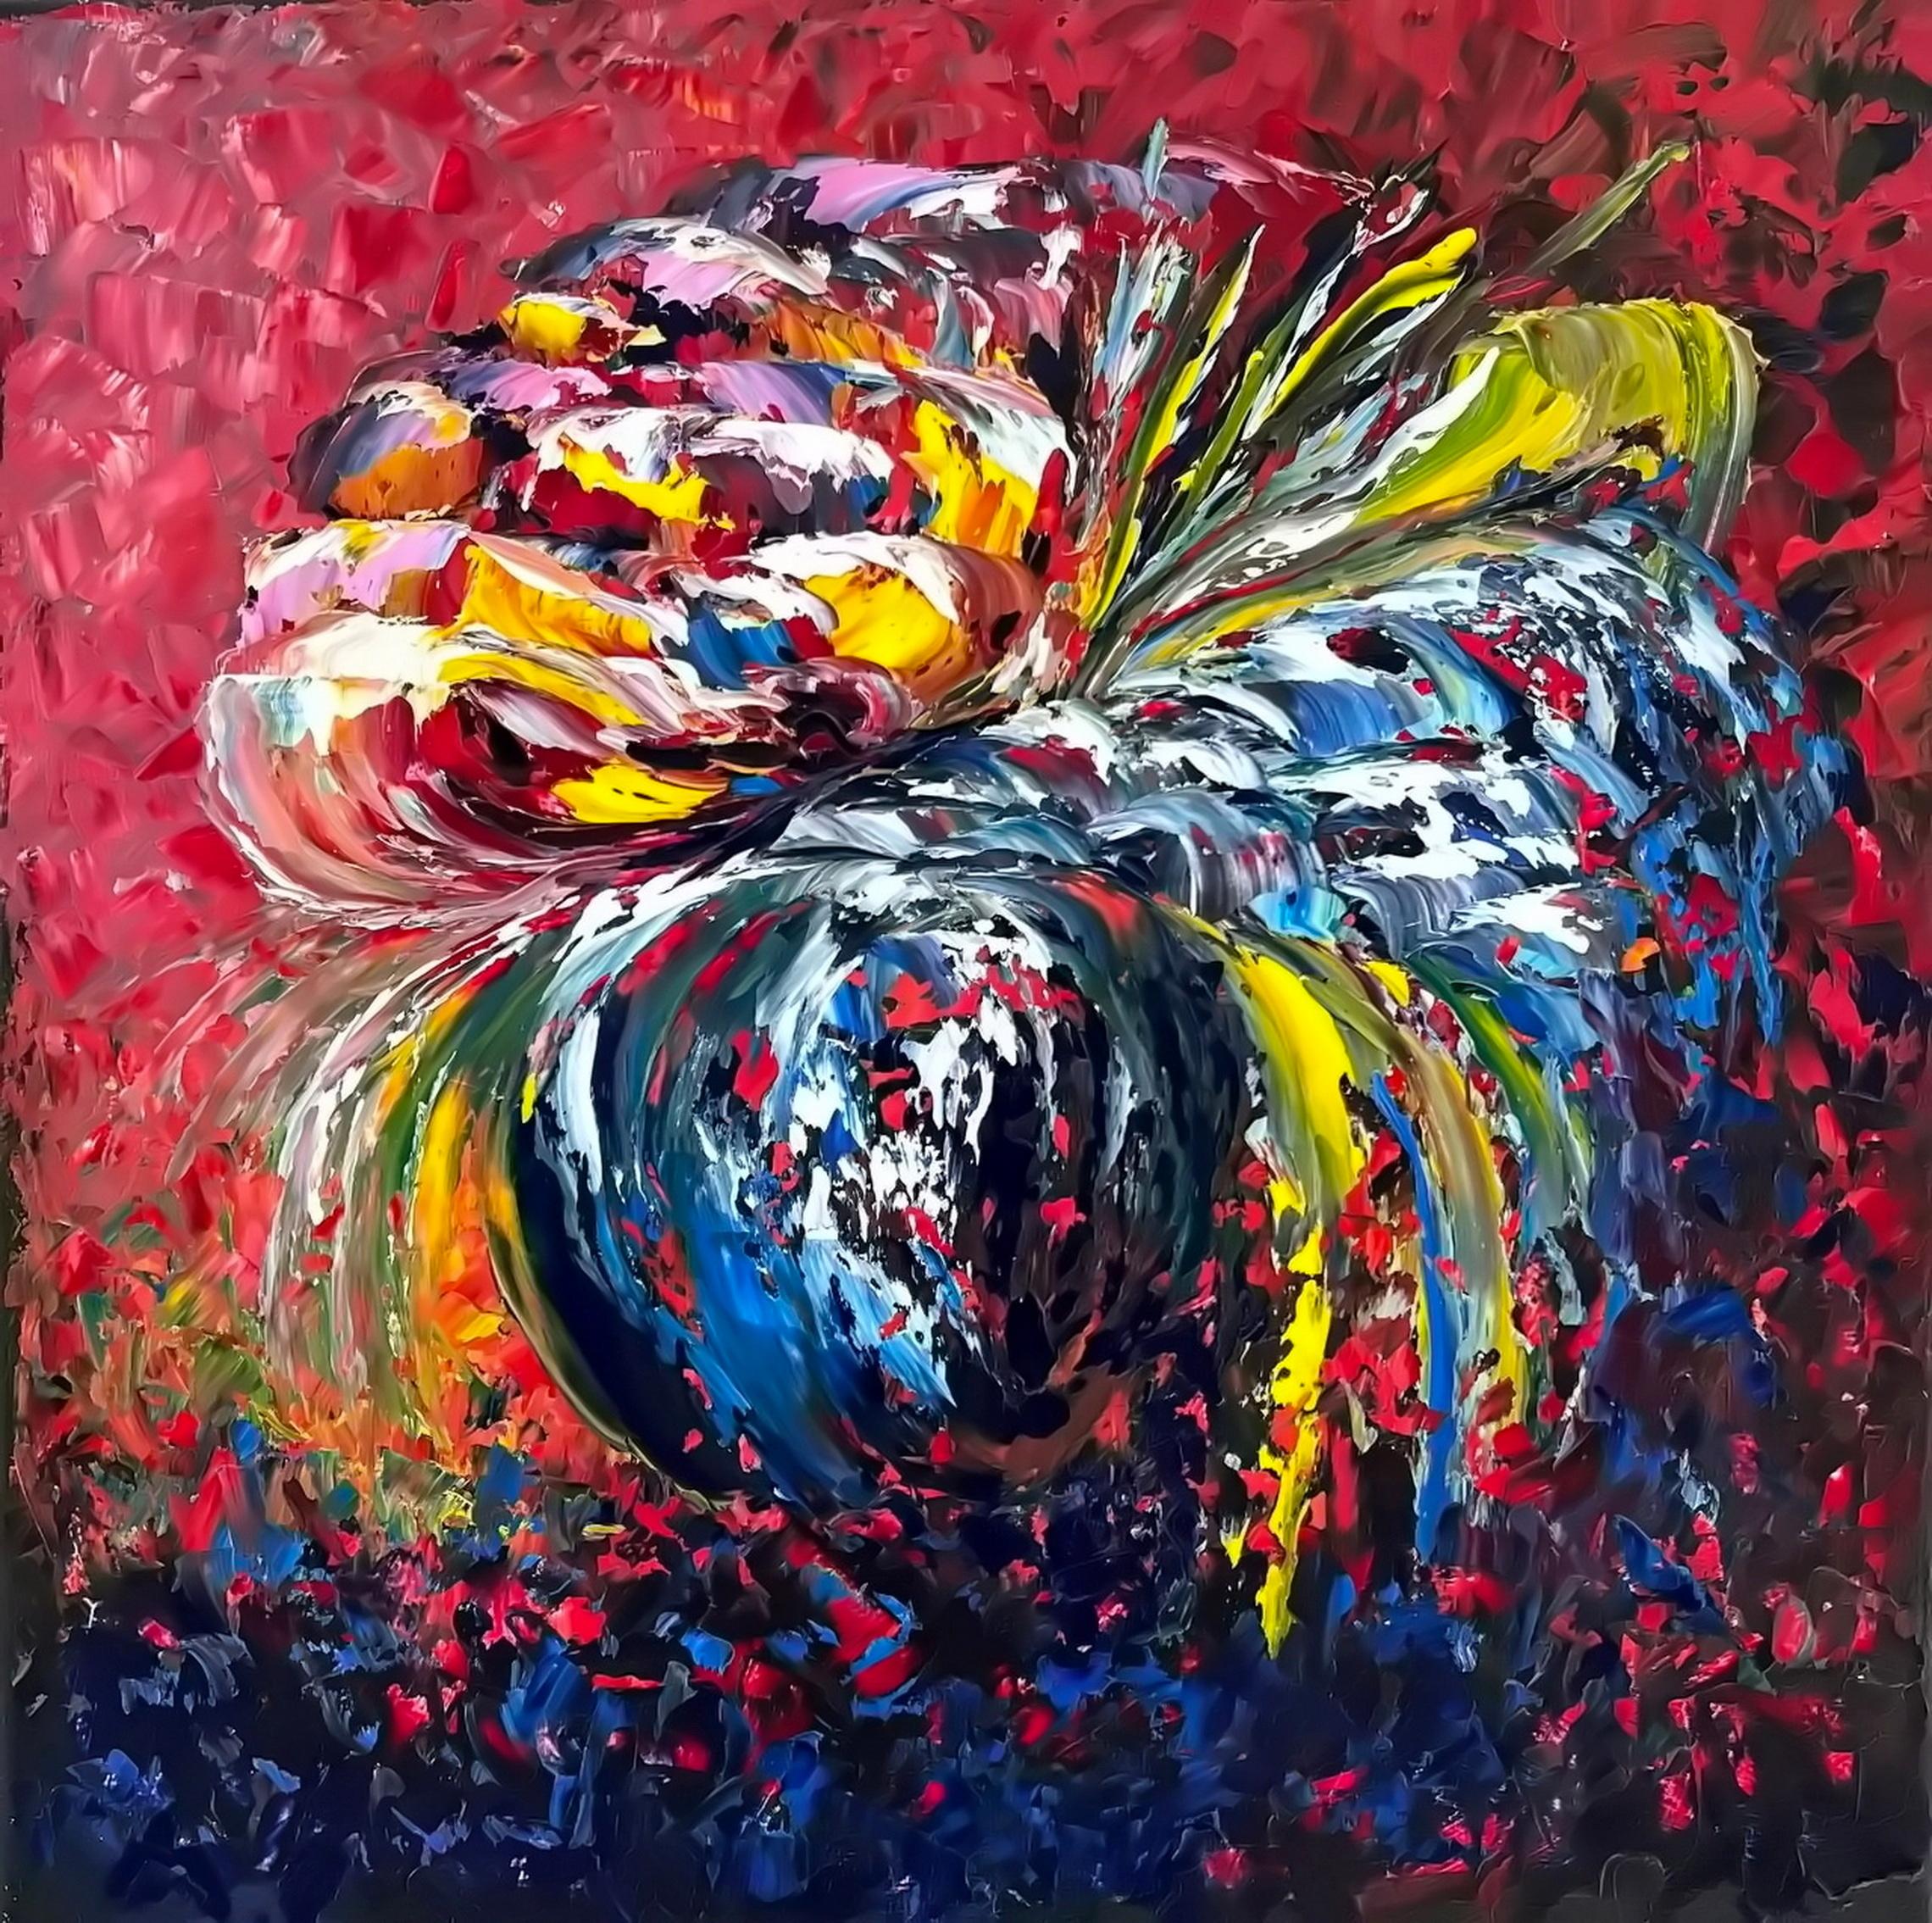 Vik Schroeder  Interior Painting -  Bouquet of Energy. Interior expressionism semi-abstract oil painting.30x30cm.